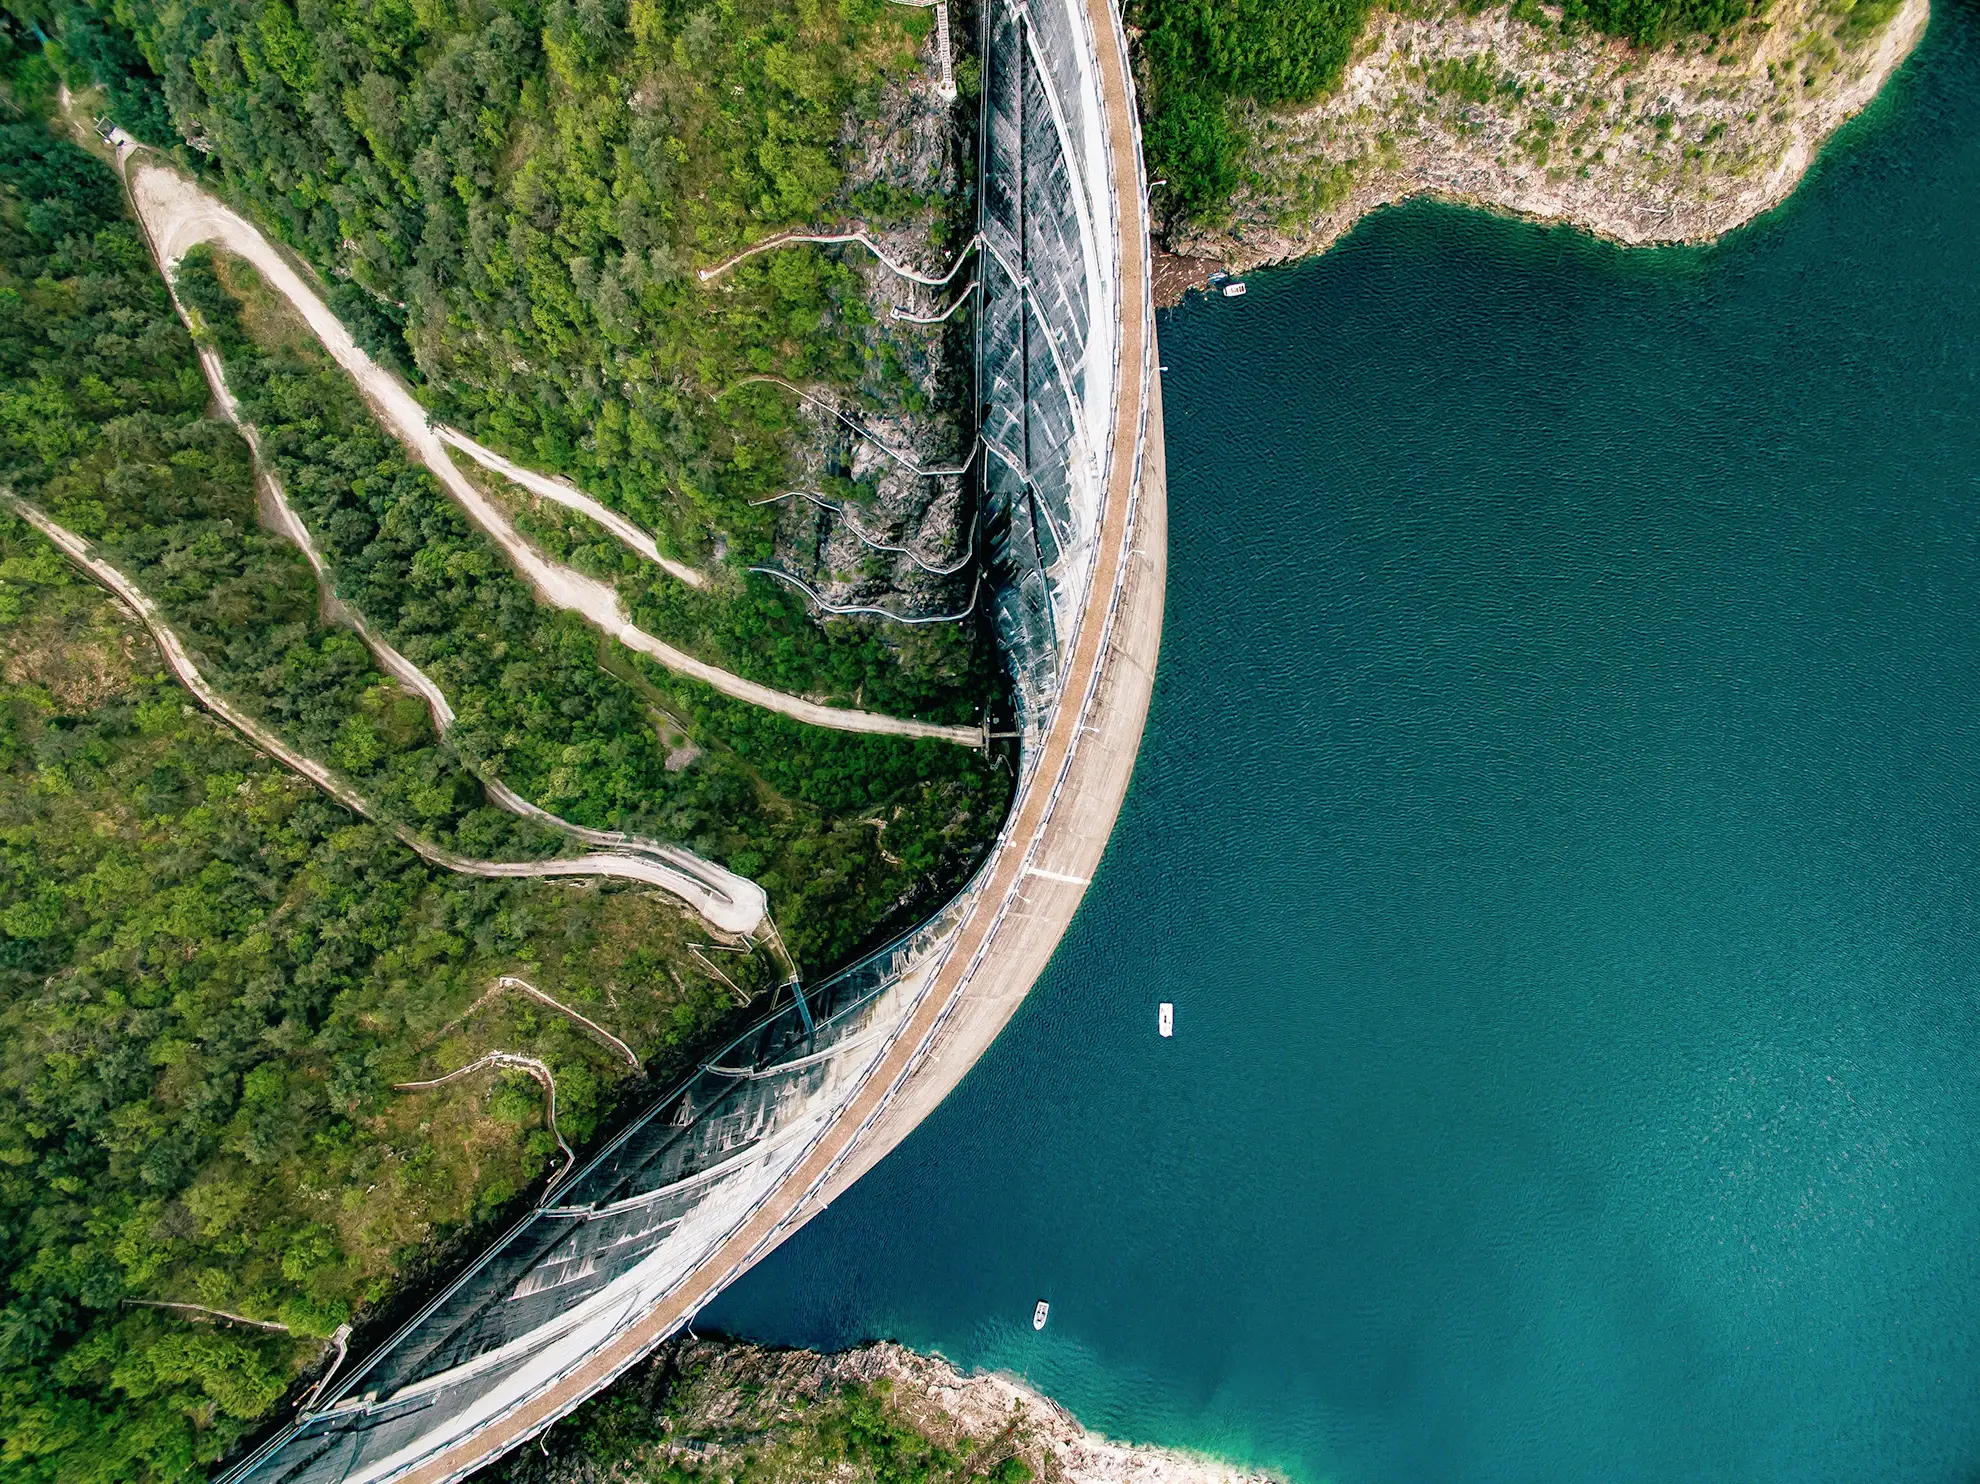 Image of a hydroelectric dam seen from the birds view to represent Volue press and media